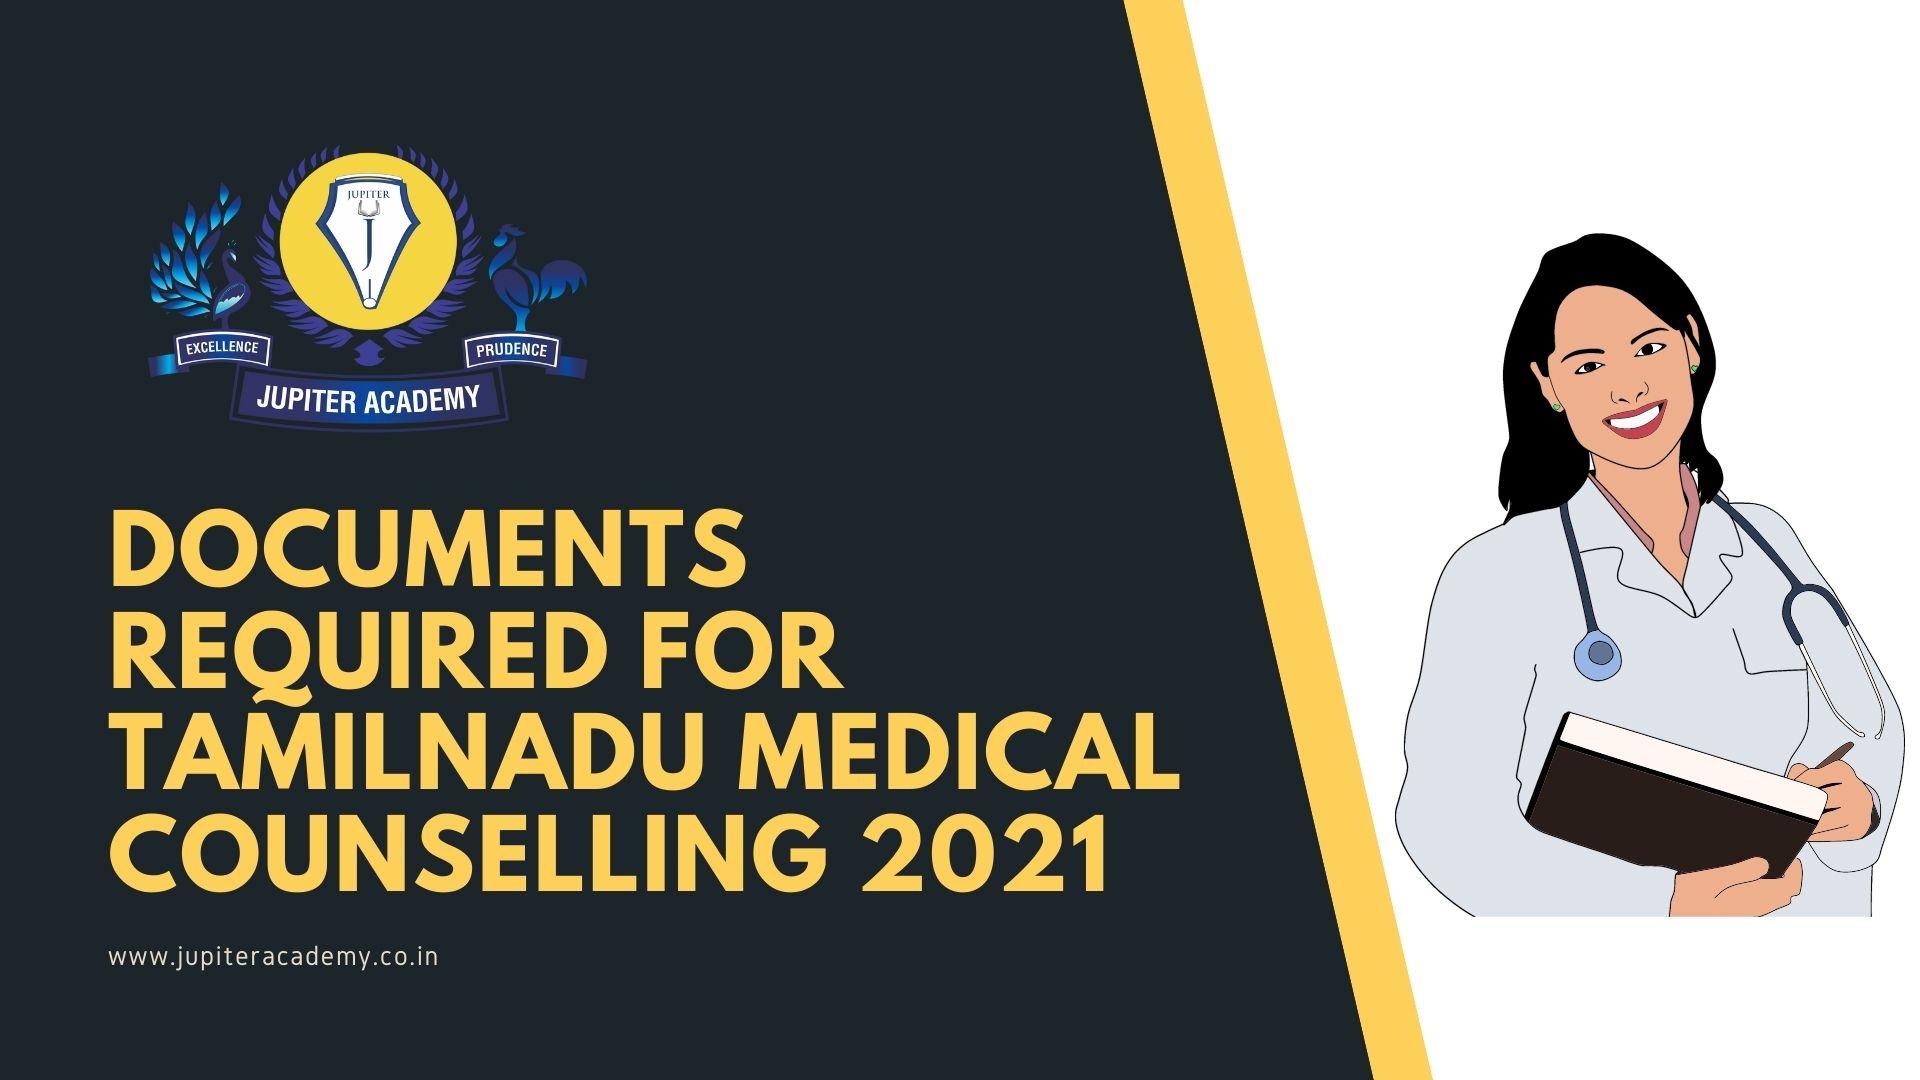 You are currently viewing Documents required for tamilnadu medical counselling 2021